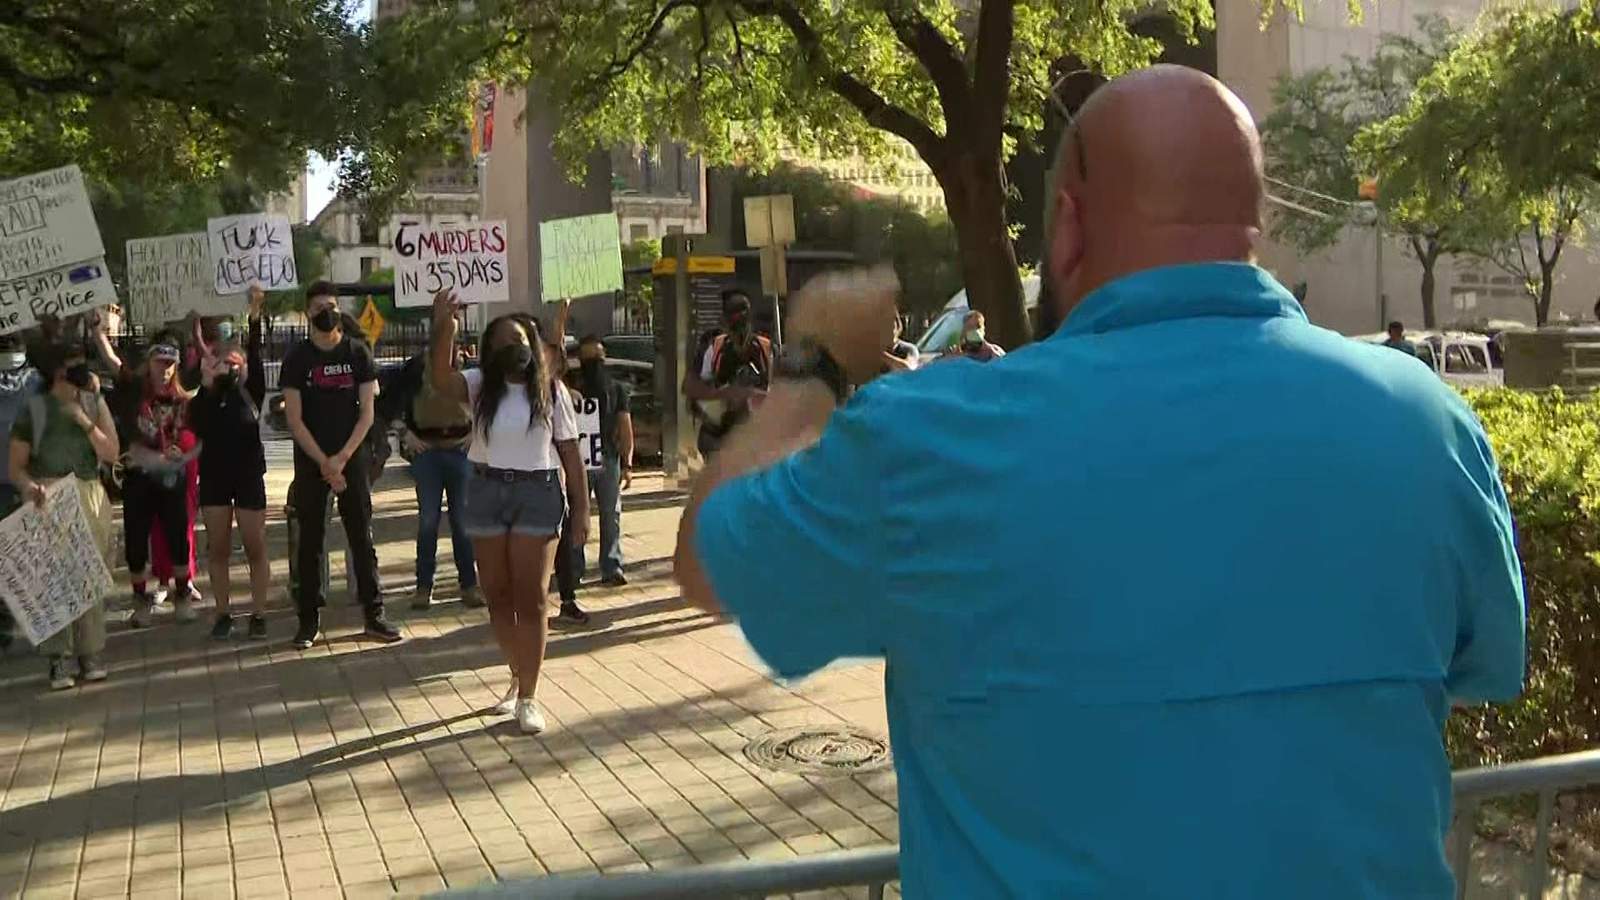 Police appreciation rally at Houston’s City Hall met with protesters calling for defunding the department